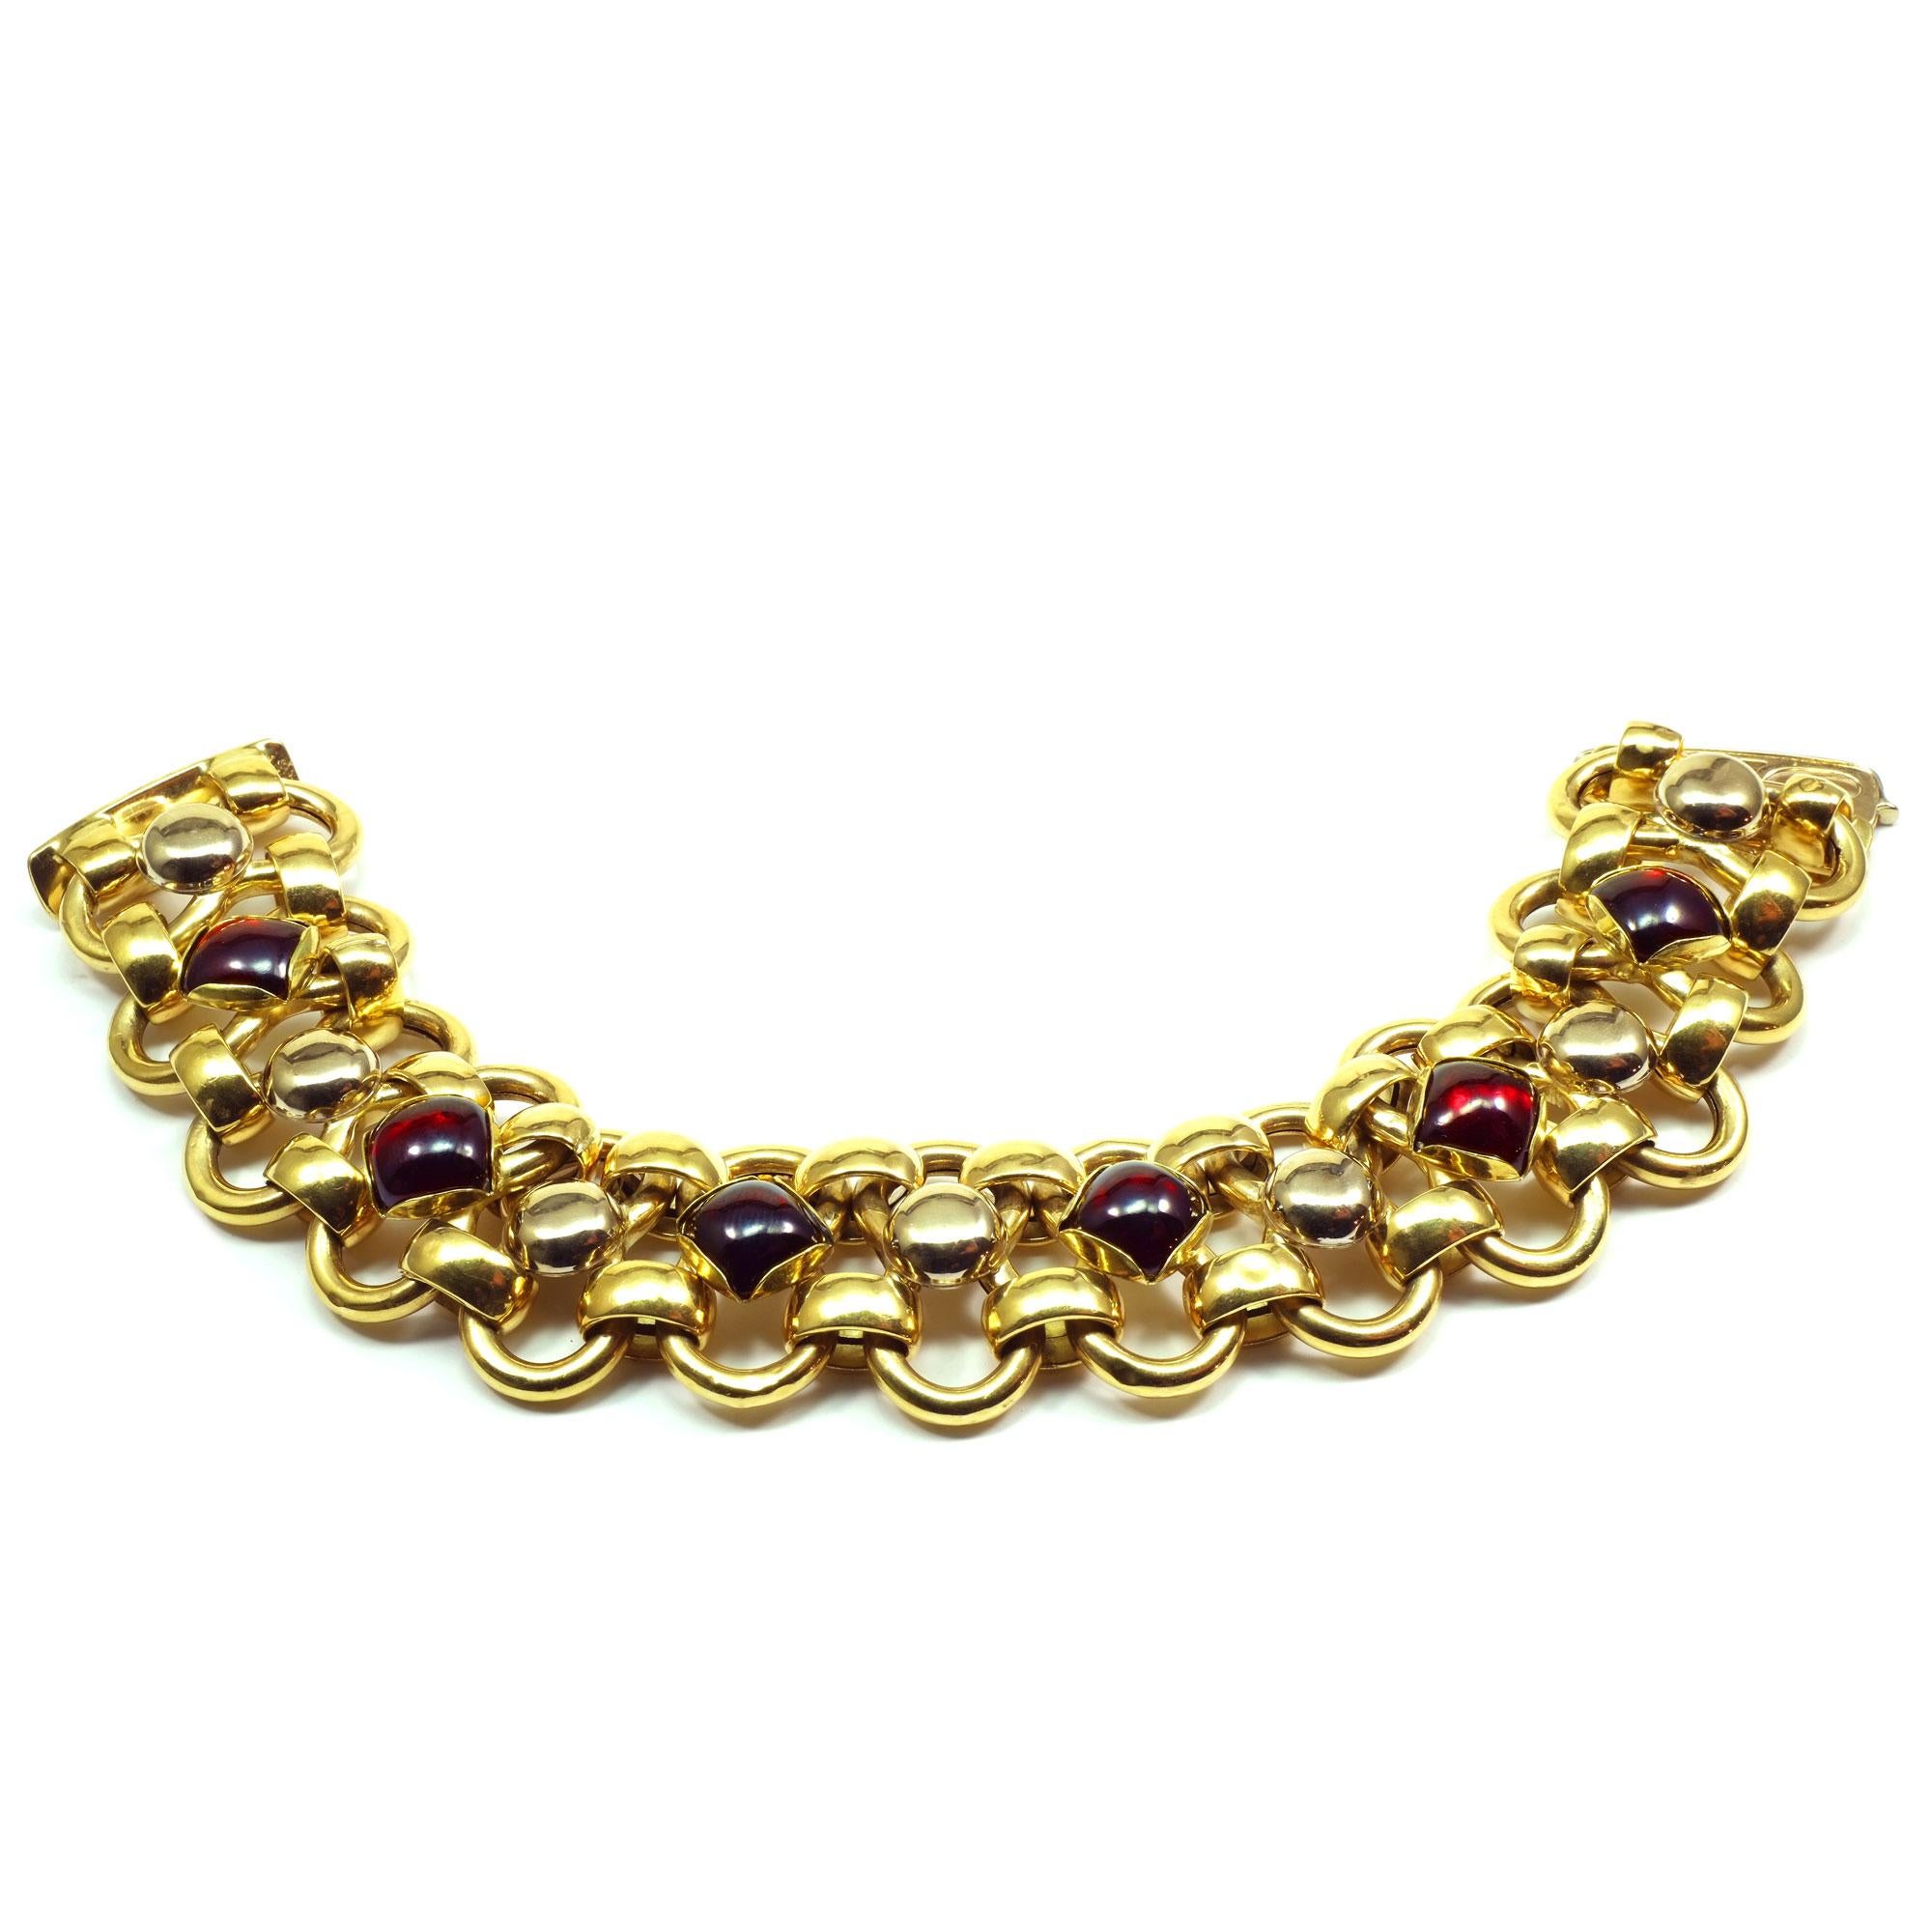 Bassani Italian 18K Yellow Gold Almandine Bracelet 

Decorative gold bracelet made of ring-shaped and arched links and set with six deep red almandines.

 

18 K / 750 gold
6 Almandine garnets cabochon carrées, dimensions 9 x9 mm
Size 8 inches long,